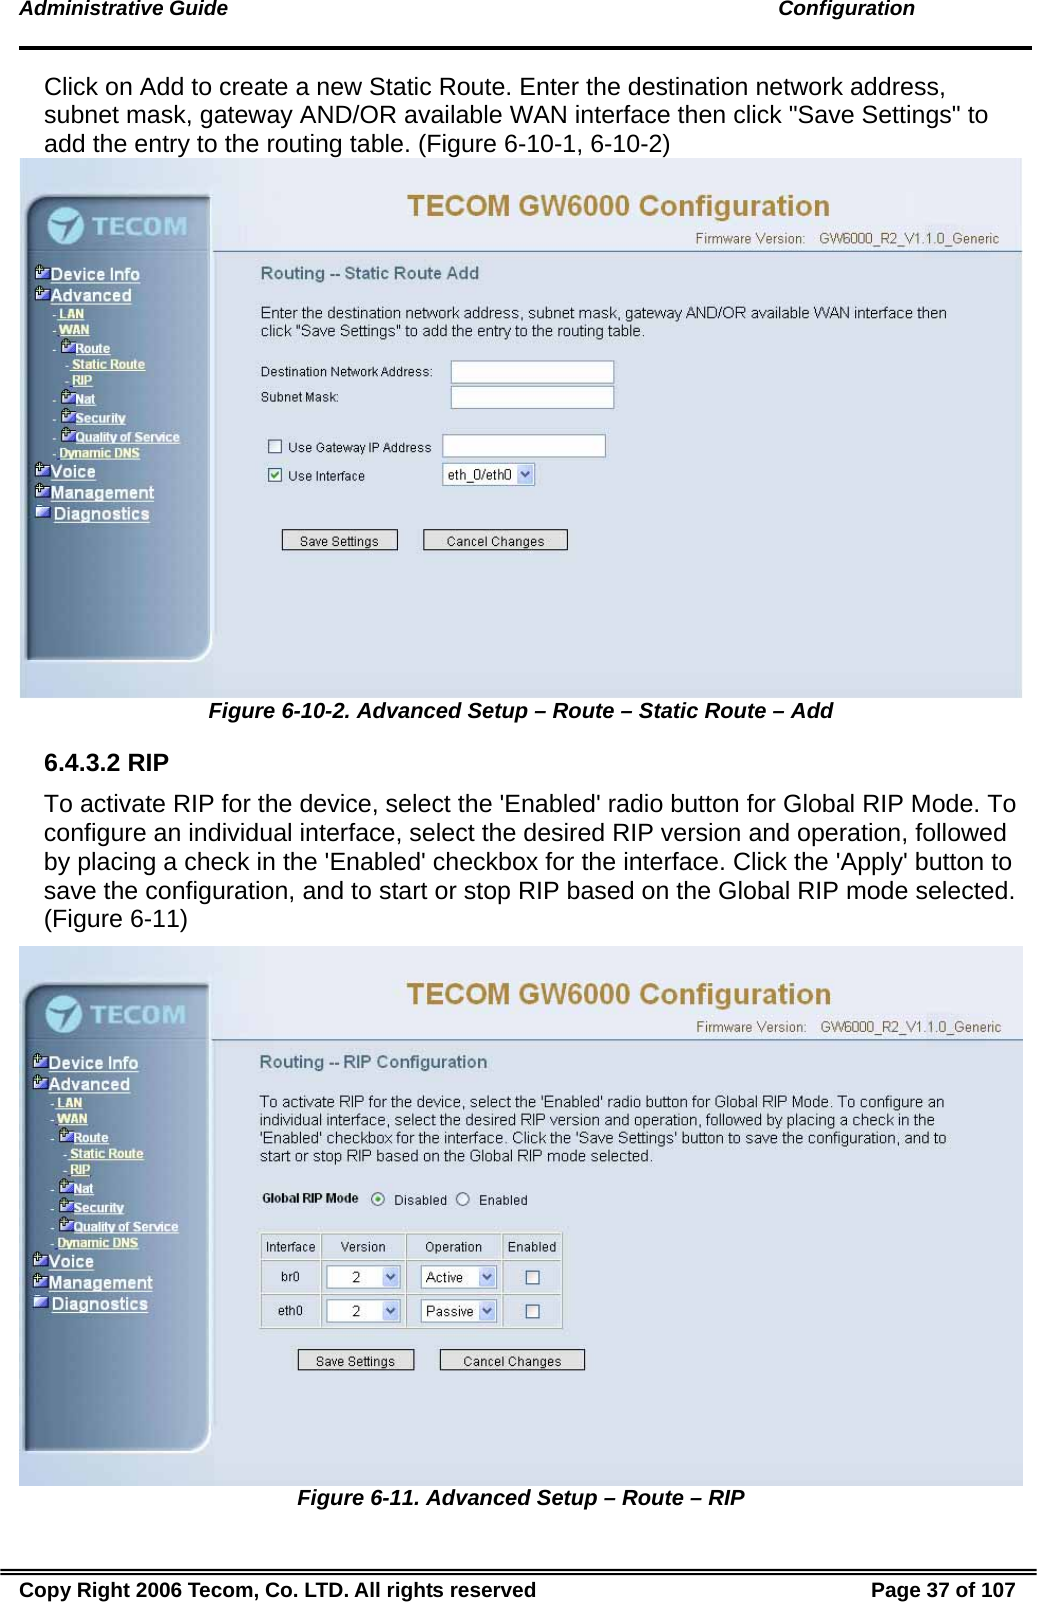 Administrative Guide                                                                                               Configuration Click on Add to create a new Static Route. Enter the destination network address, subnet mask, gateway AND/OR available WAN interface then click &quot;Save Settings&quot; to add the entry to the routing table. (Figure 6-10-1, 6-10-2)  Figure 6-10-2. Advanced Setup – Route – Static Route – Add 6.4.3.2 RIP To activate RIP for the device, select the &apos;Enabled&apos; radio button for Global RIP Mode. To configure an individual interface, select the desired RIP version and operation, followed by placing a check in the &apos;Enabled&apos; checkbox for the interface. Click the &apos;Apply&apos; button to save the configuration, and to start or stop RIP based on the Global RIP mode selected. (Figure 6-11)  Figure 6-11. Advanced Setup – Route – RIP Copy Right 2006 Tecom, Co. LTD. All rights reserved  Page 37 of 107 